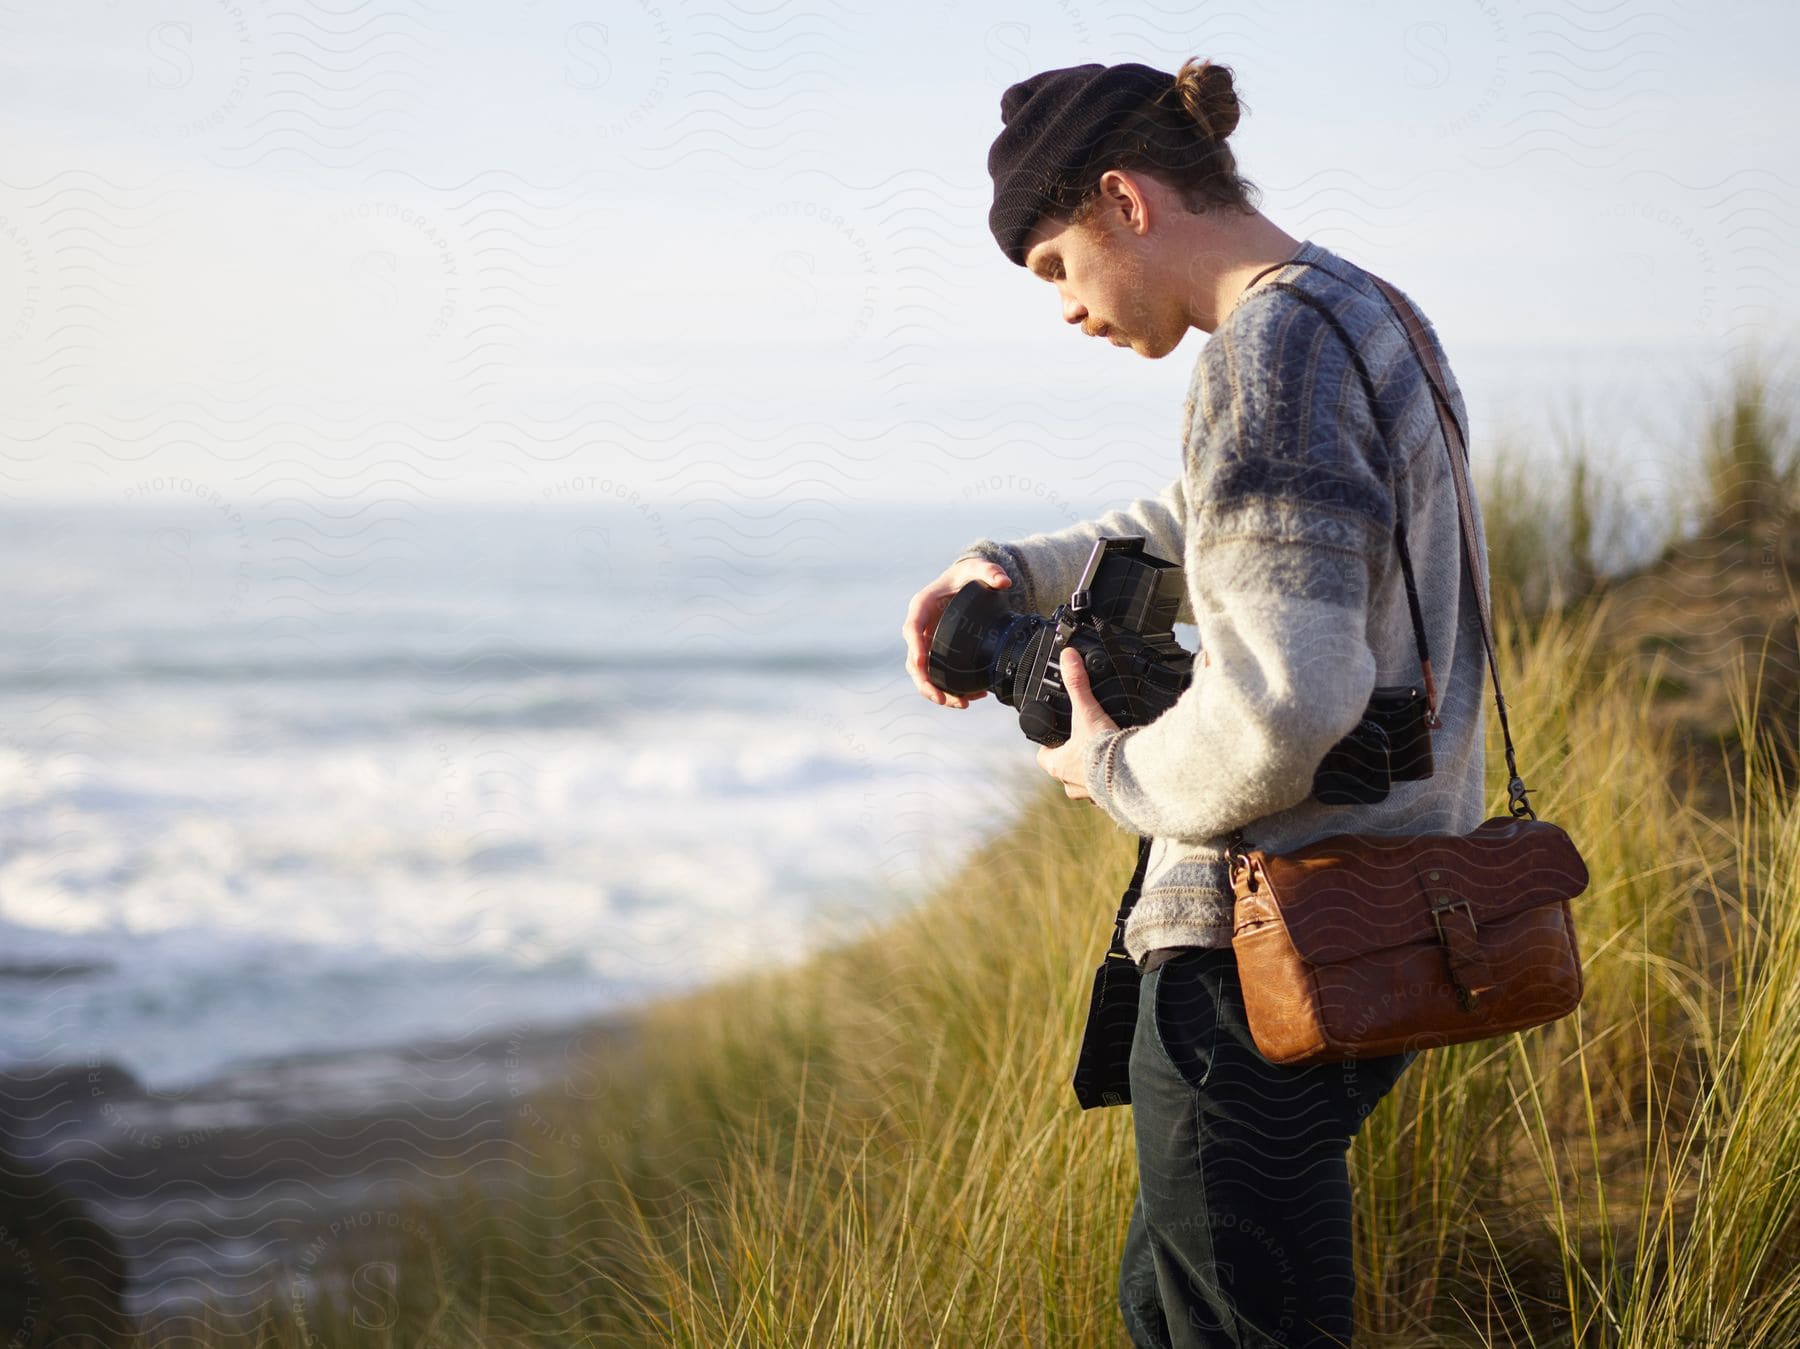 Stock photo of photographer standing by the sea, setting up their camera.